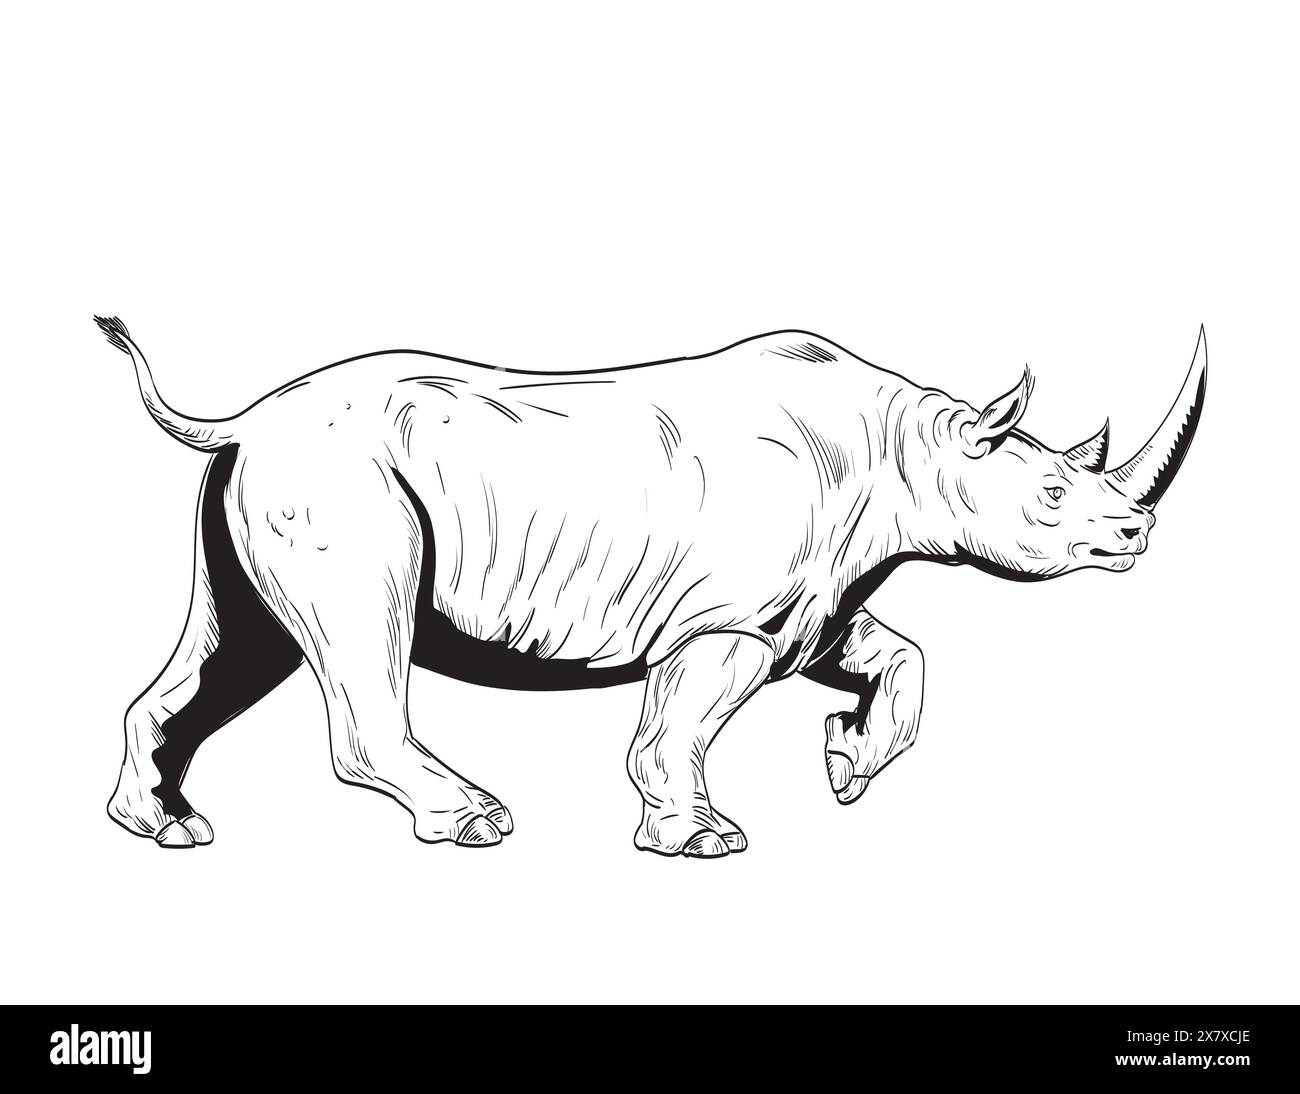 Comics style drawing or illustration of a rhinoceros or rhino, an odd-toed ungulates in the family Rhinocerotidae, charging viewed from side isolated Stock Vector